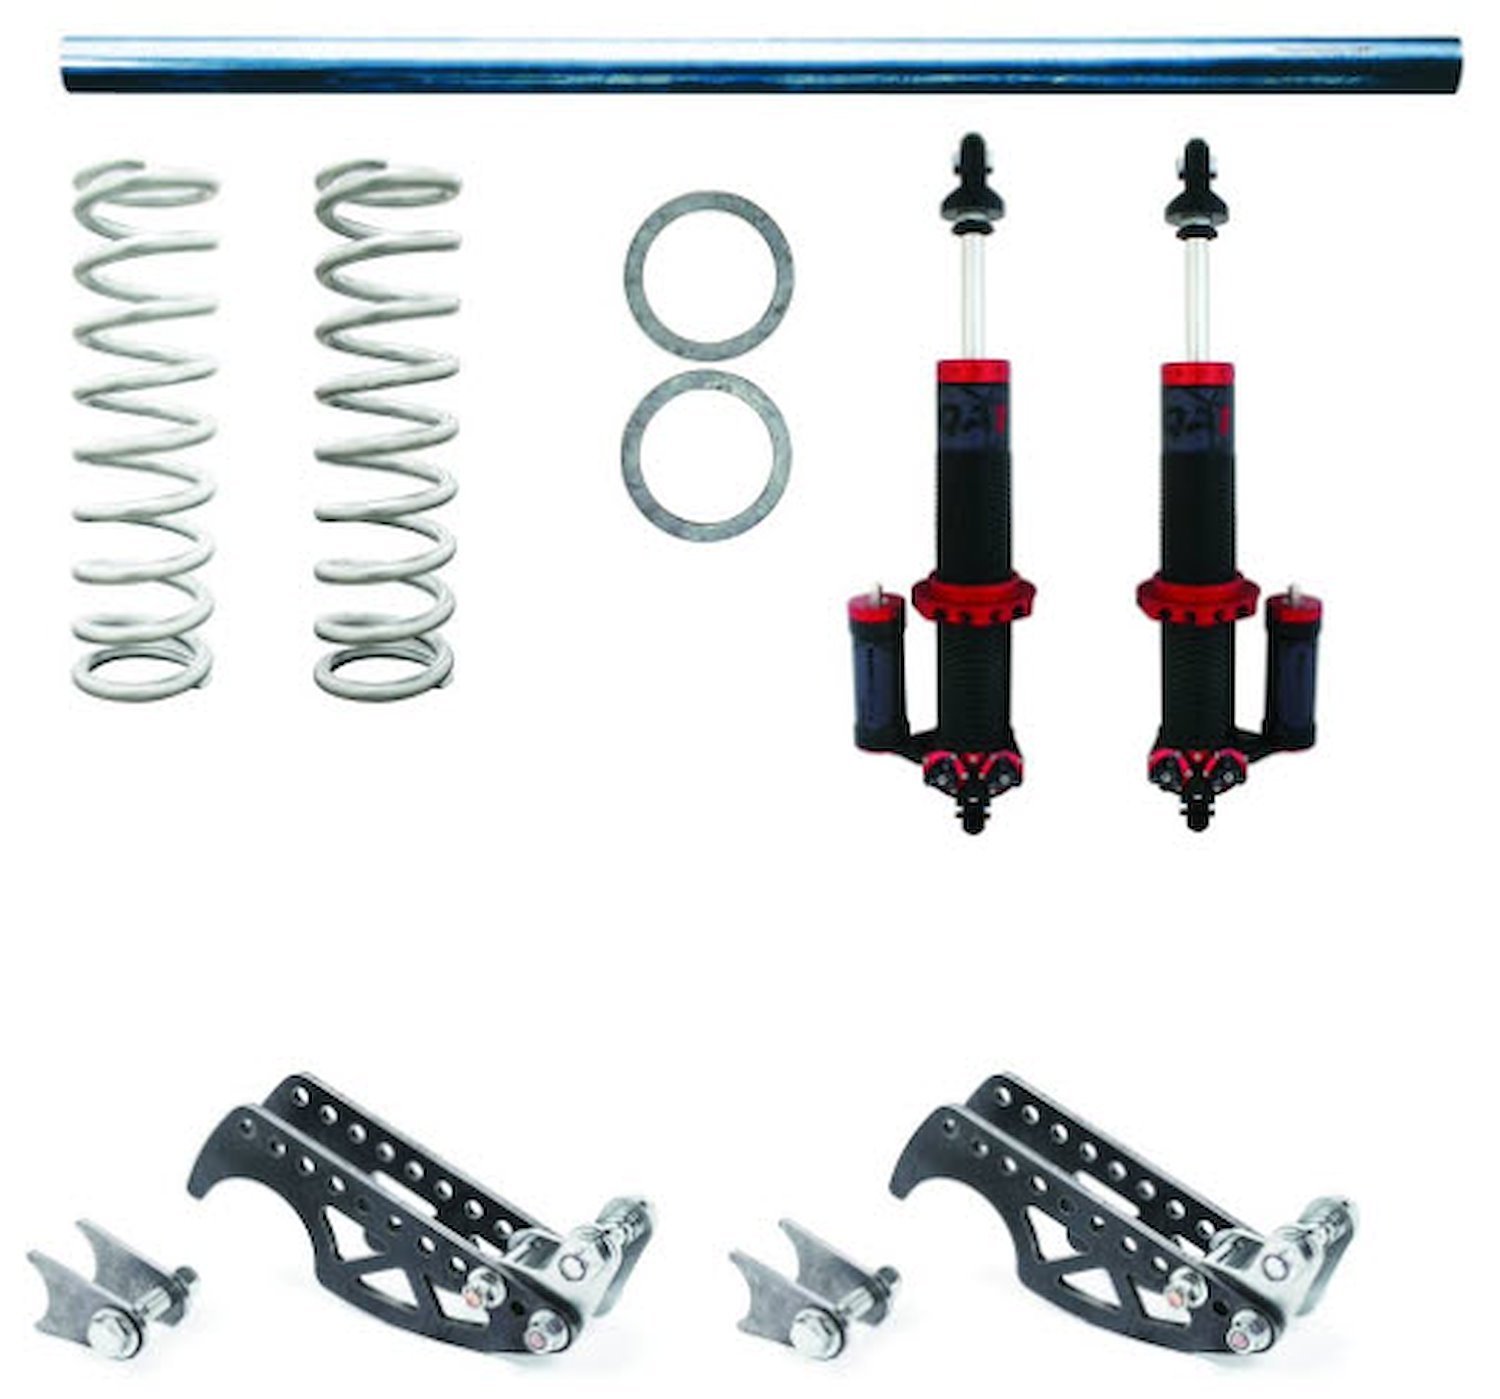 DM501-2501 Heavy-Duty Pro Rear Coil-Over Conversion System for 3 1/4 in. Axle Tubes w/MOD-Series Shocks & 250 lb. Springs